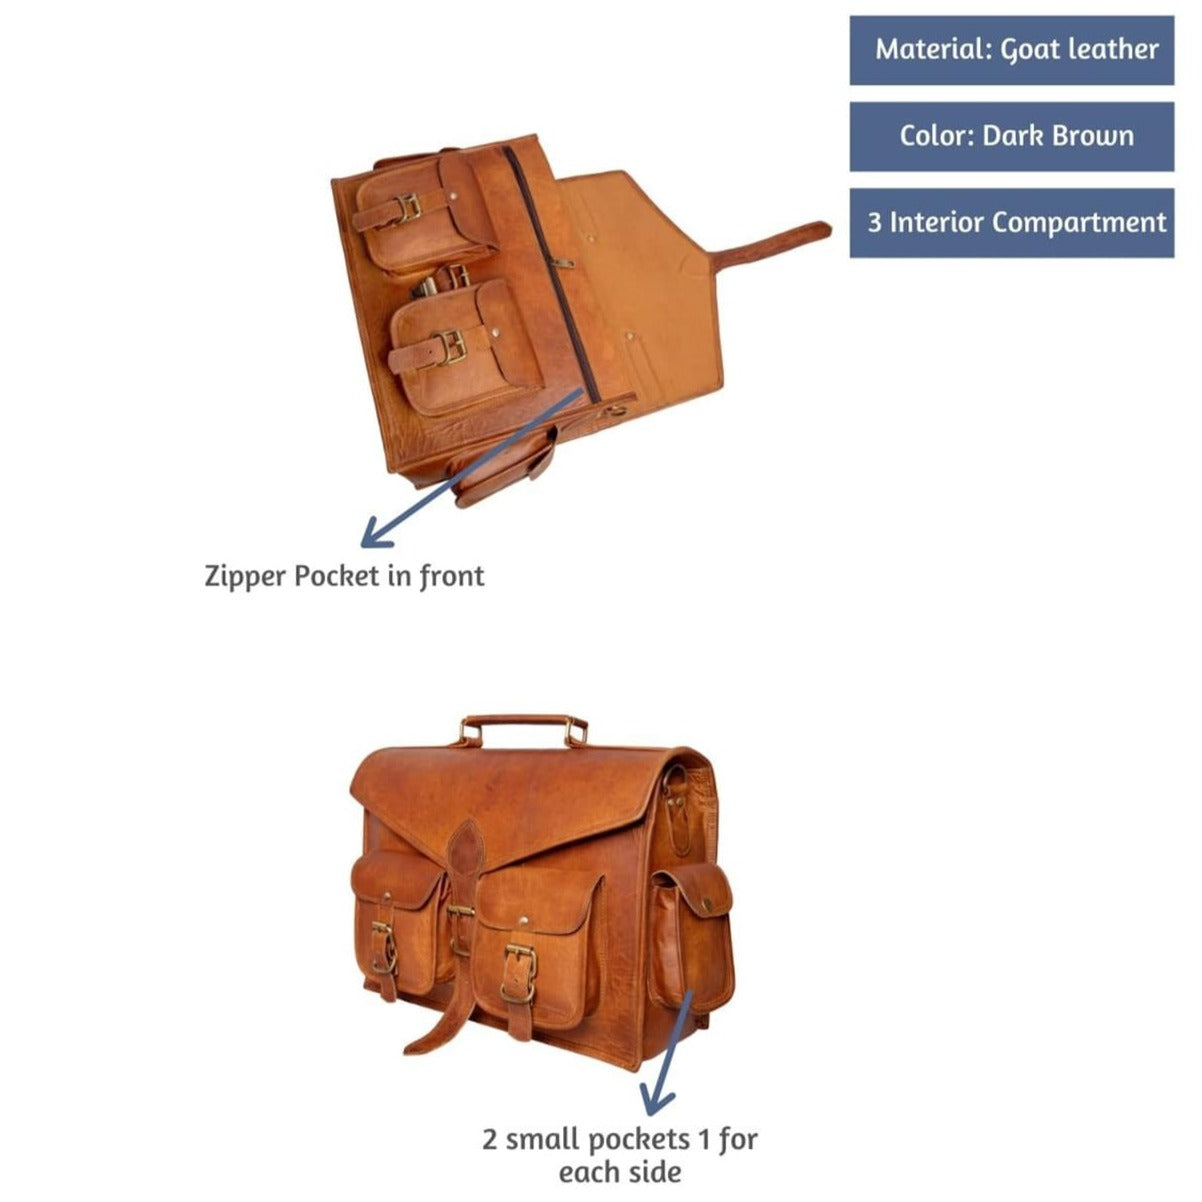 Small Leather Satchel